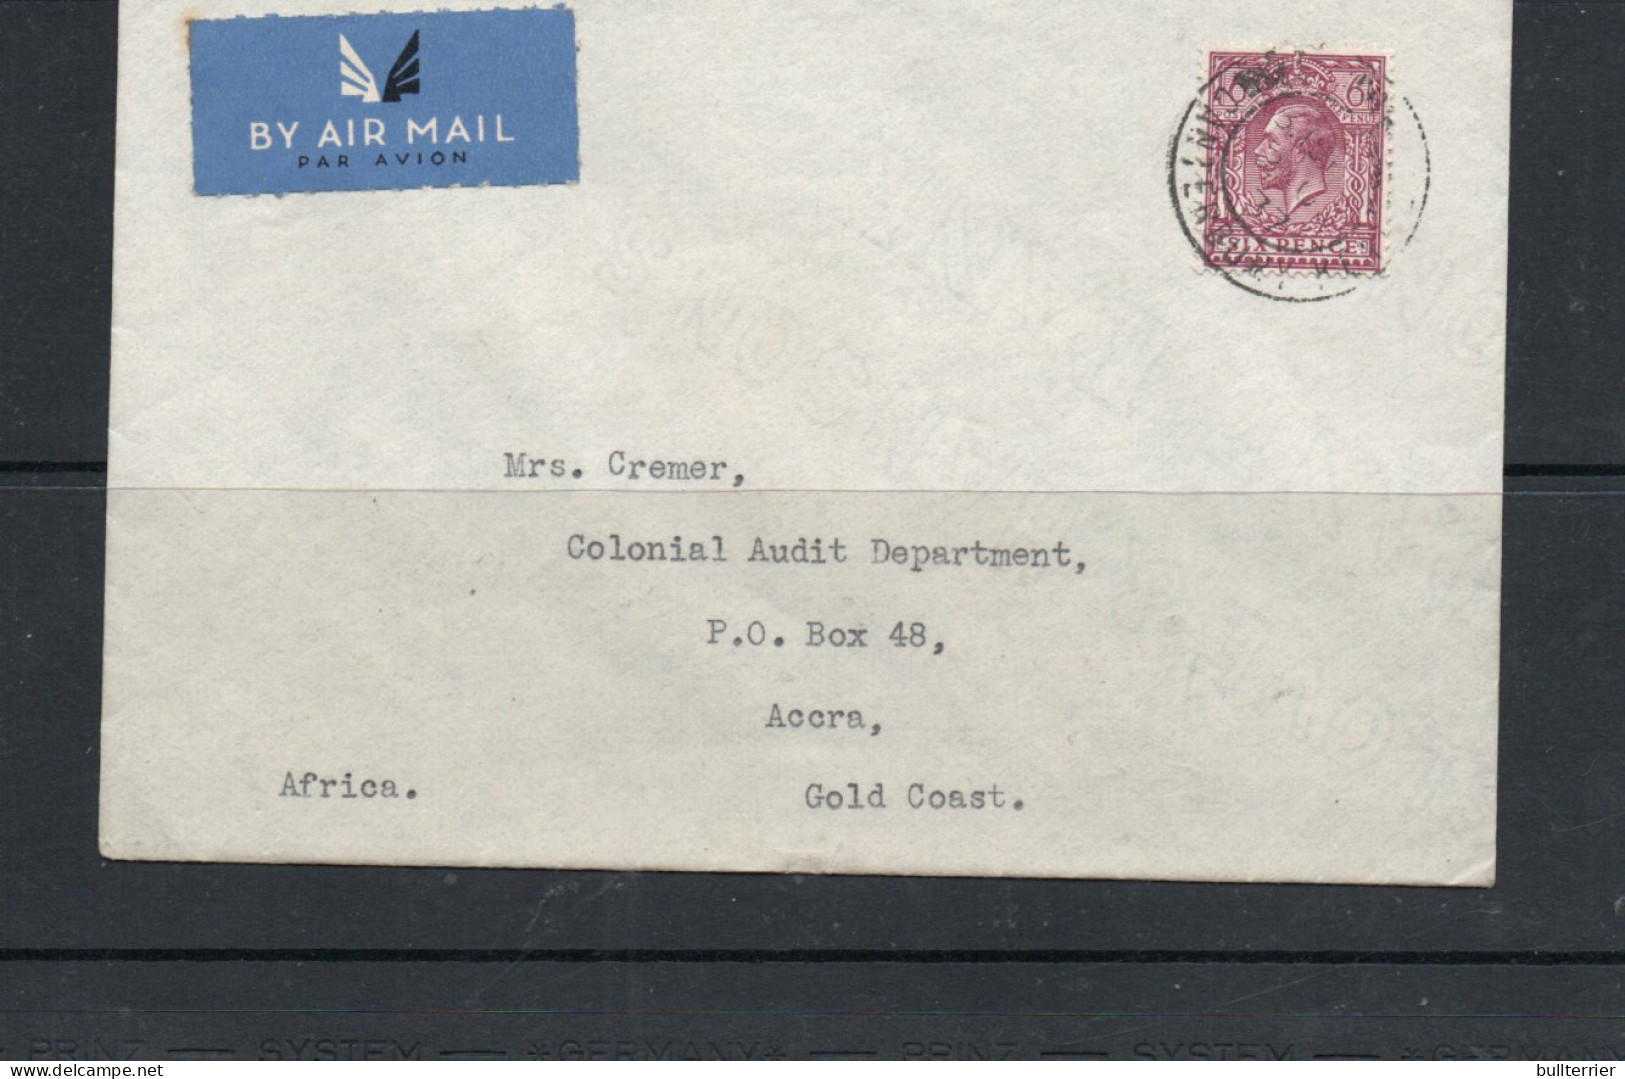 GB - 1937 - IMPERIAL AIRWAYS  COVER UK TO  GOLD COAST   BY KS15 WITH ACCRA BACKSTAMP - Ficción & Especimenes